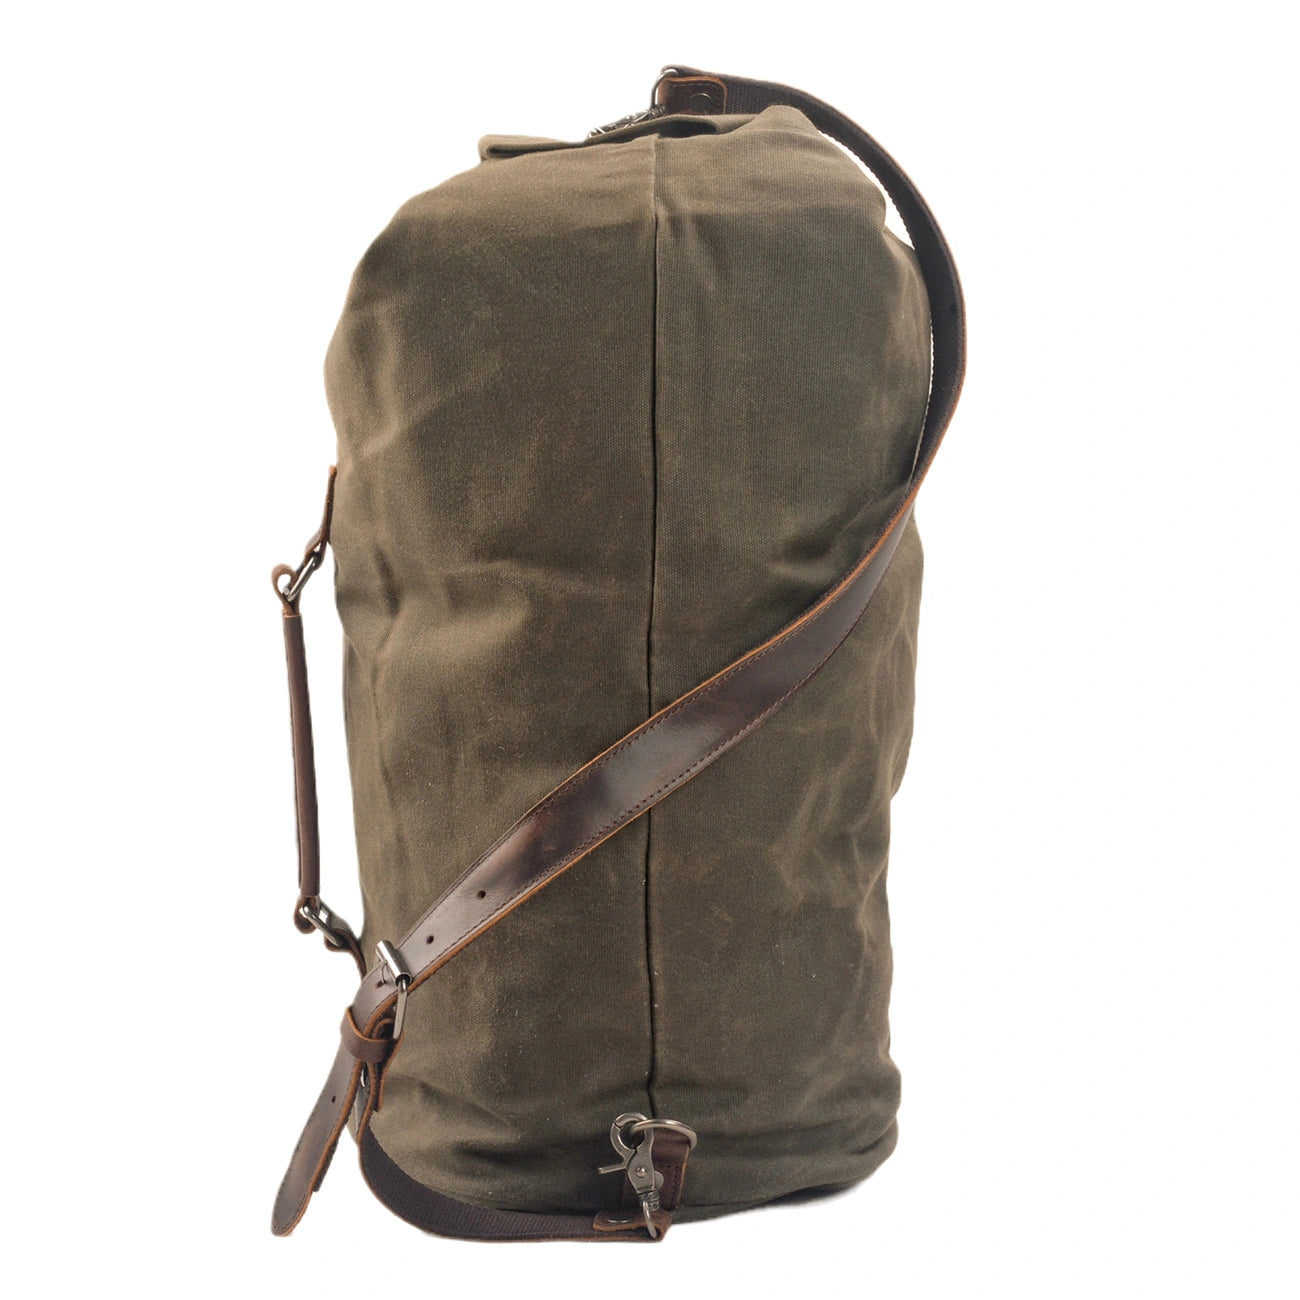 Military Duffel Bag Top Load Double Strap Canvas Backpack Army Travel